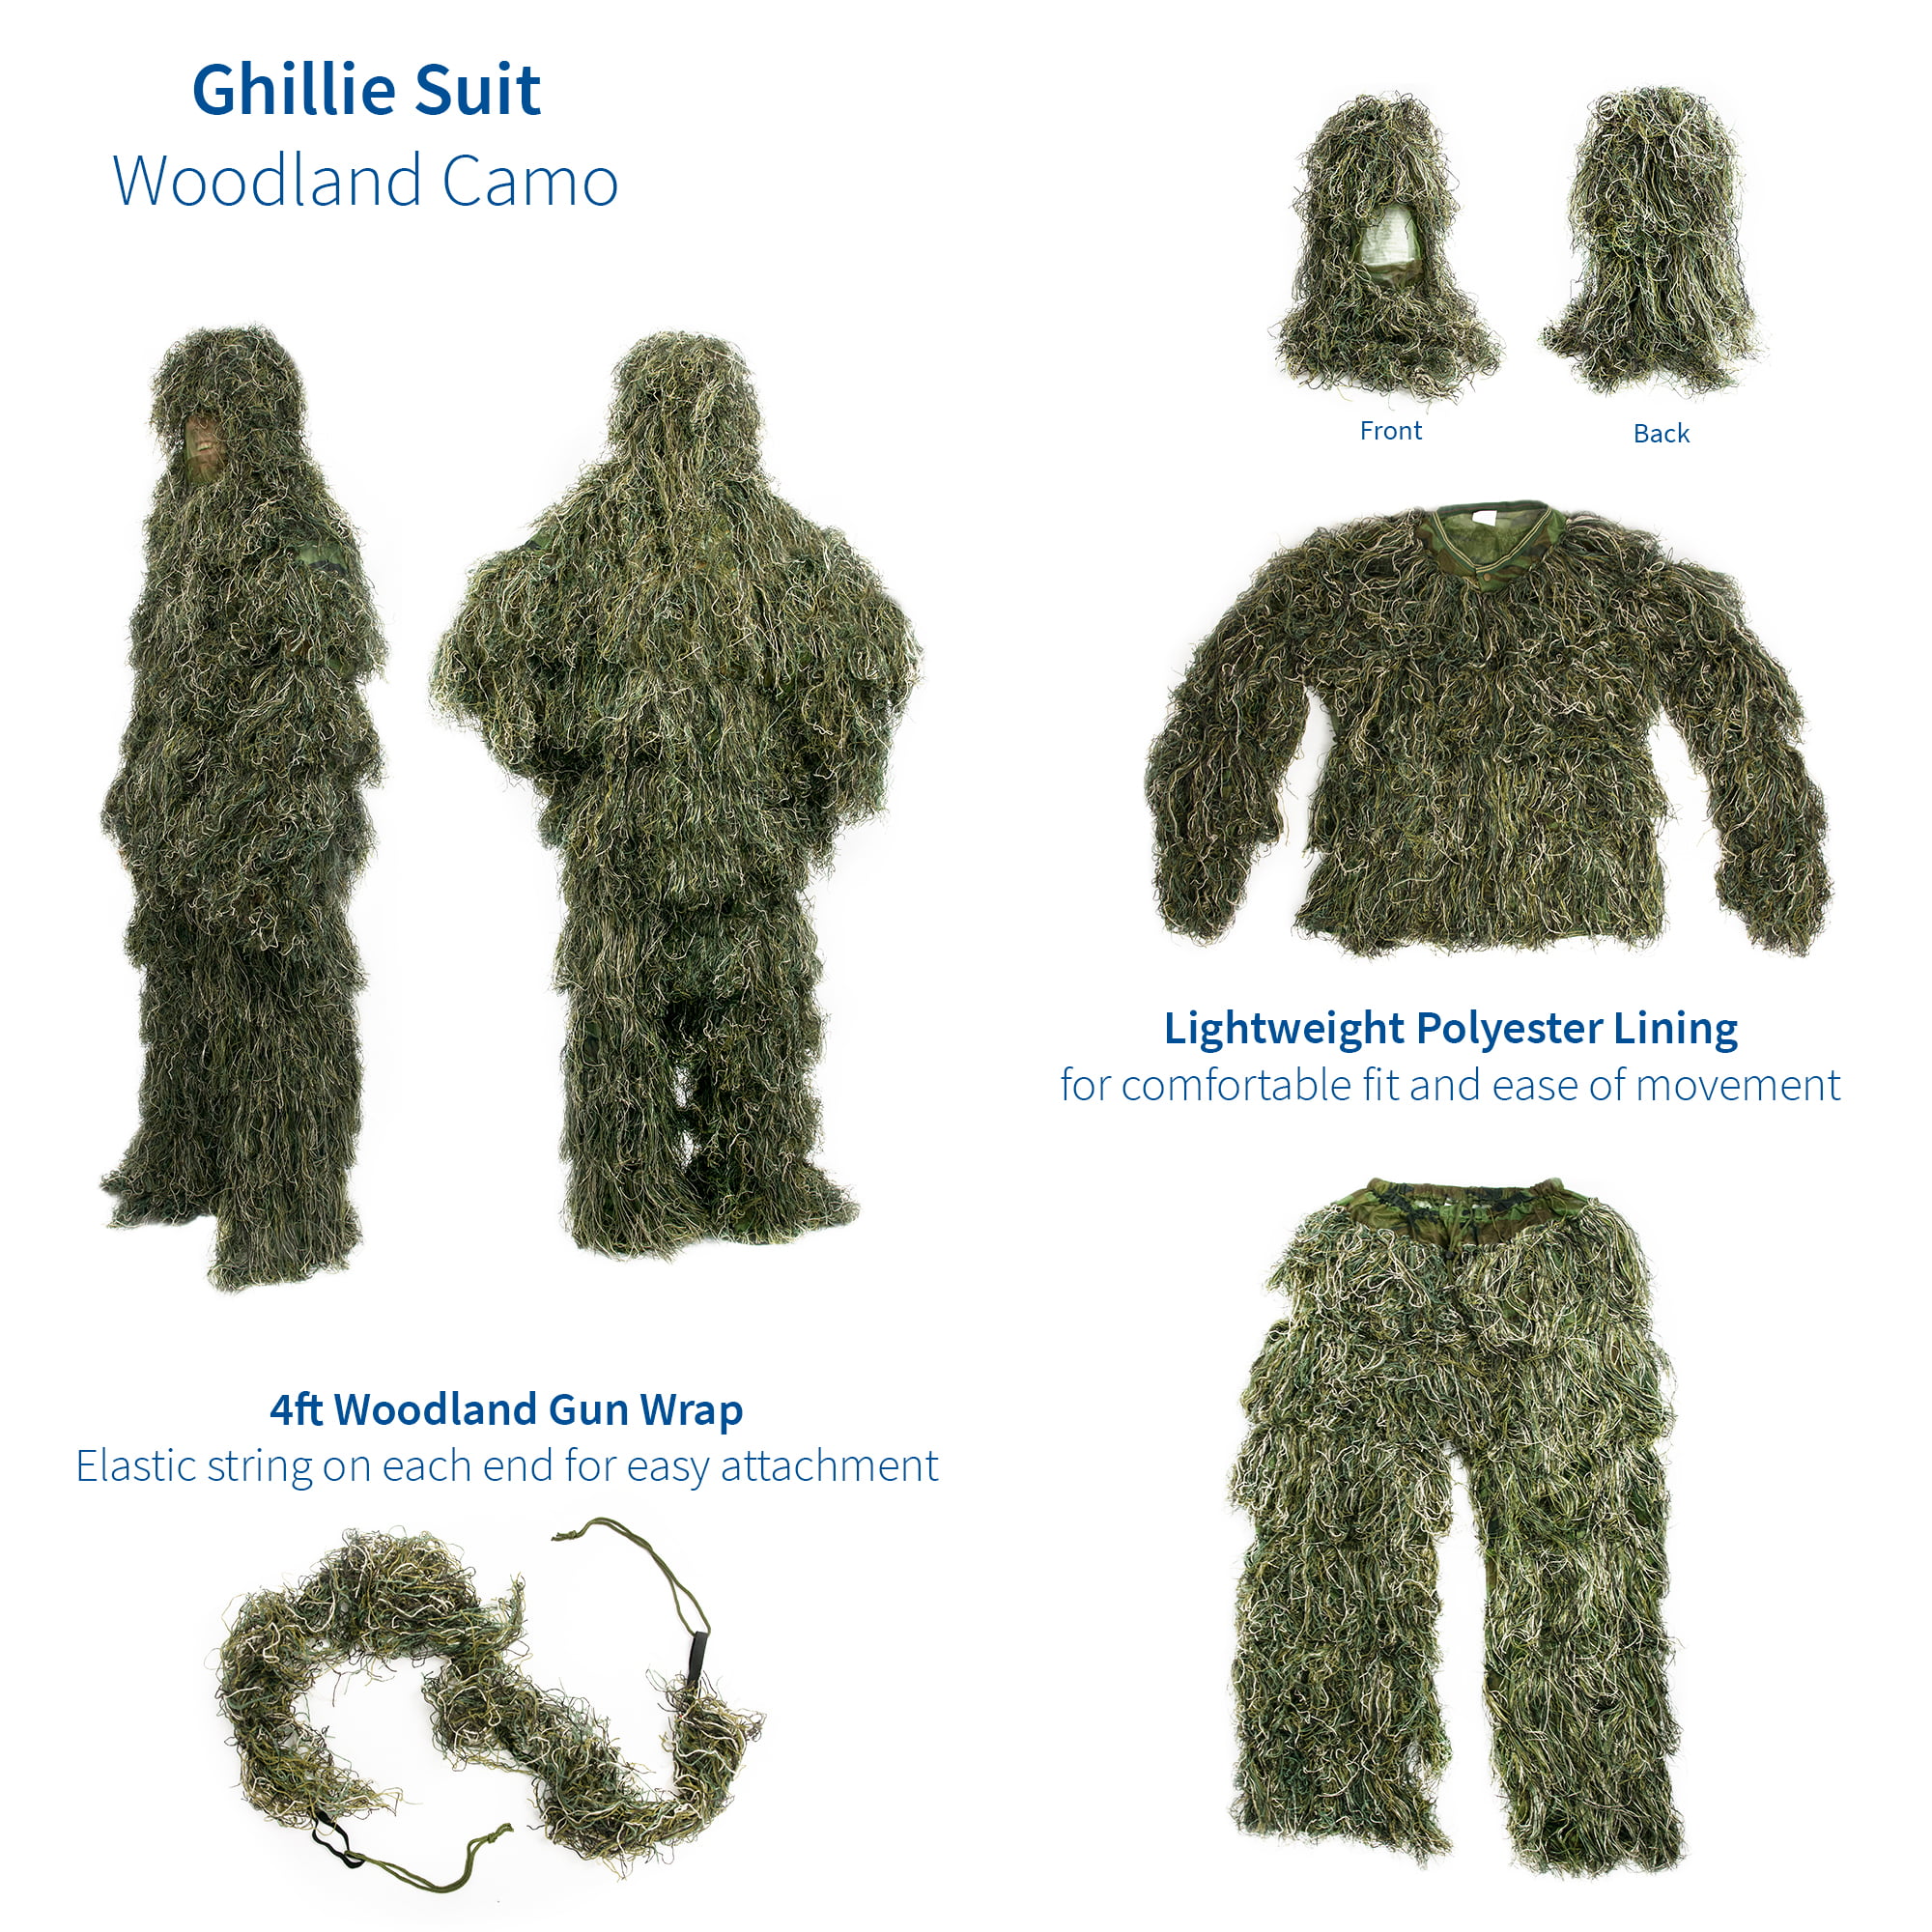 store Bag 3D Ghillie Suit Camo Woodland Camouflage Forest Hunting 4Piece suit 